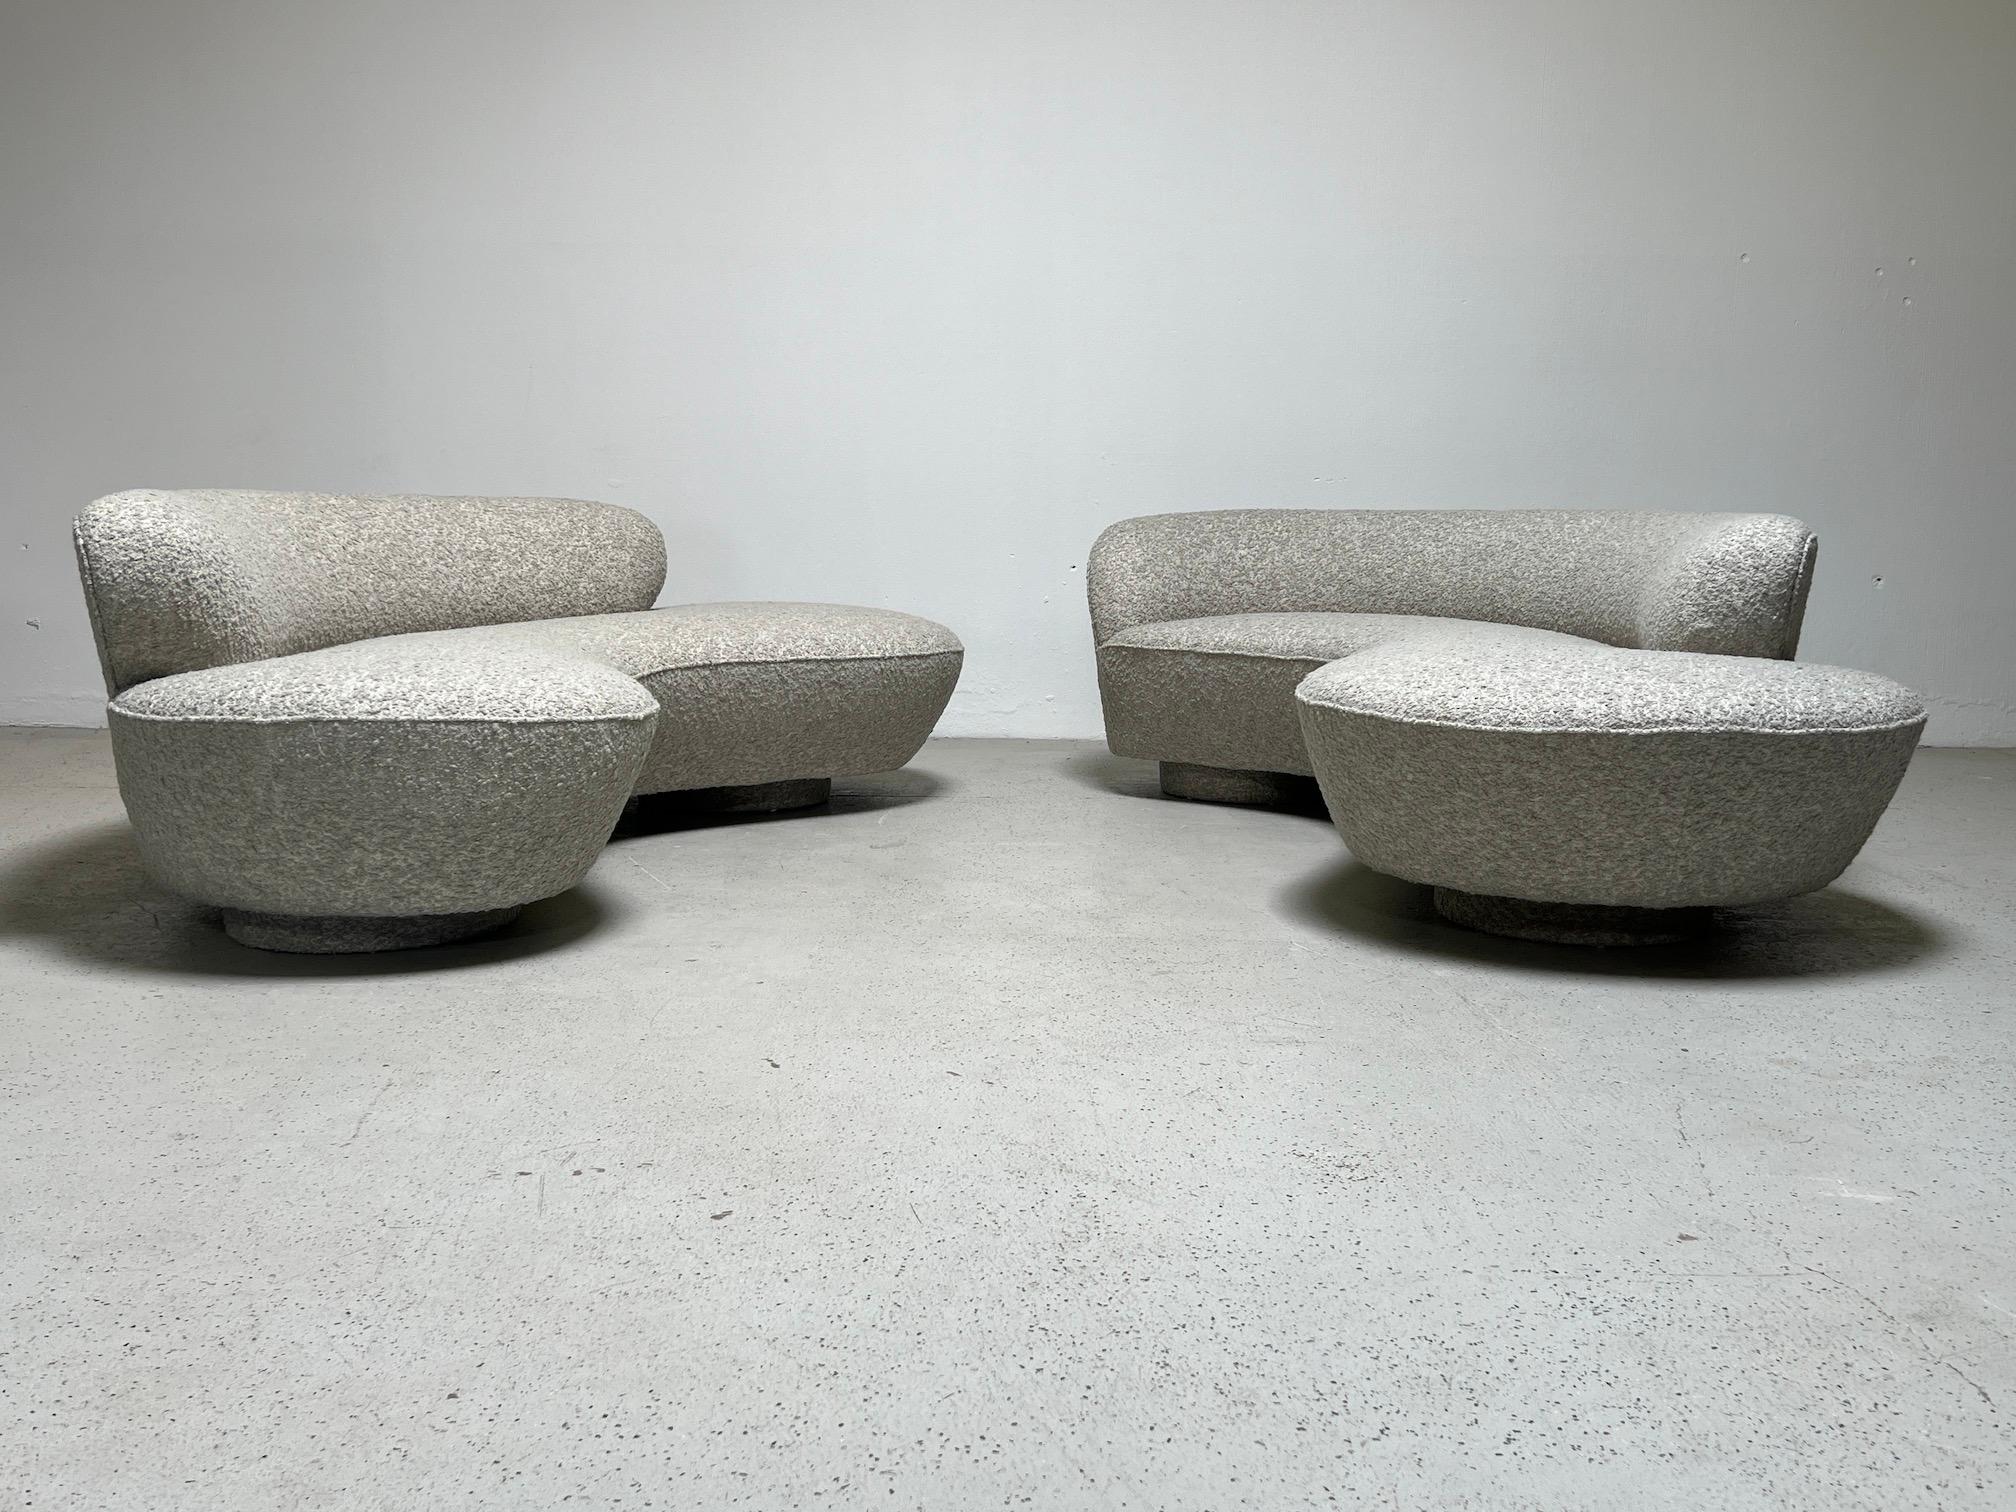 Late 20th Century Pair of Sofas by Vladimir Kagan for Directional